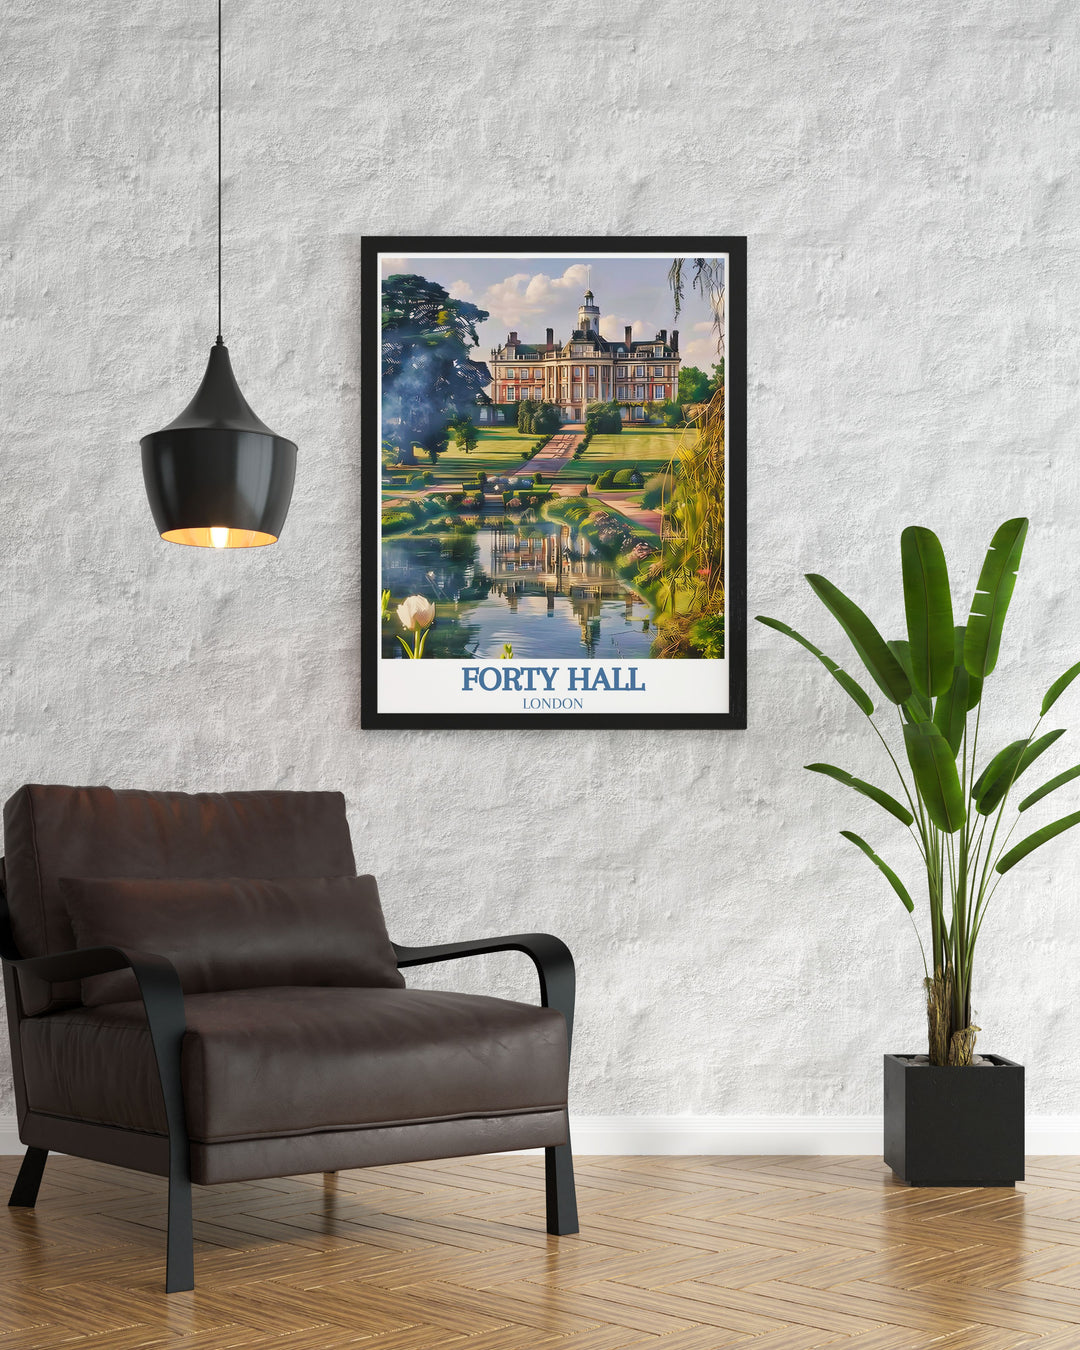 The beautifully preserved gardens and parklands of Forty Hall are depicted in this print, highlighting the serene and lush surroundings that make it a perfect retreat in London.